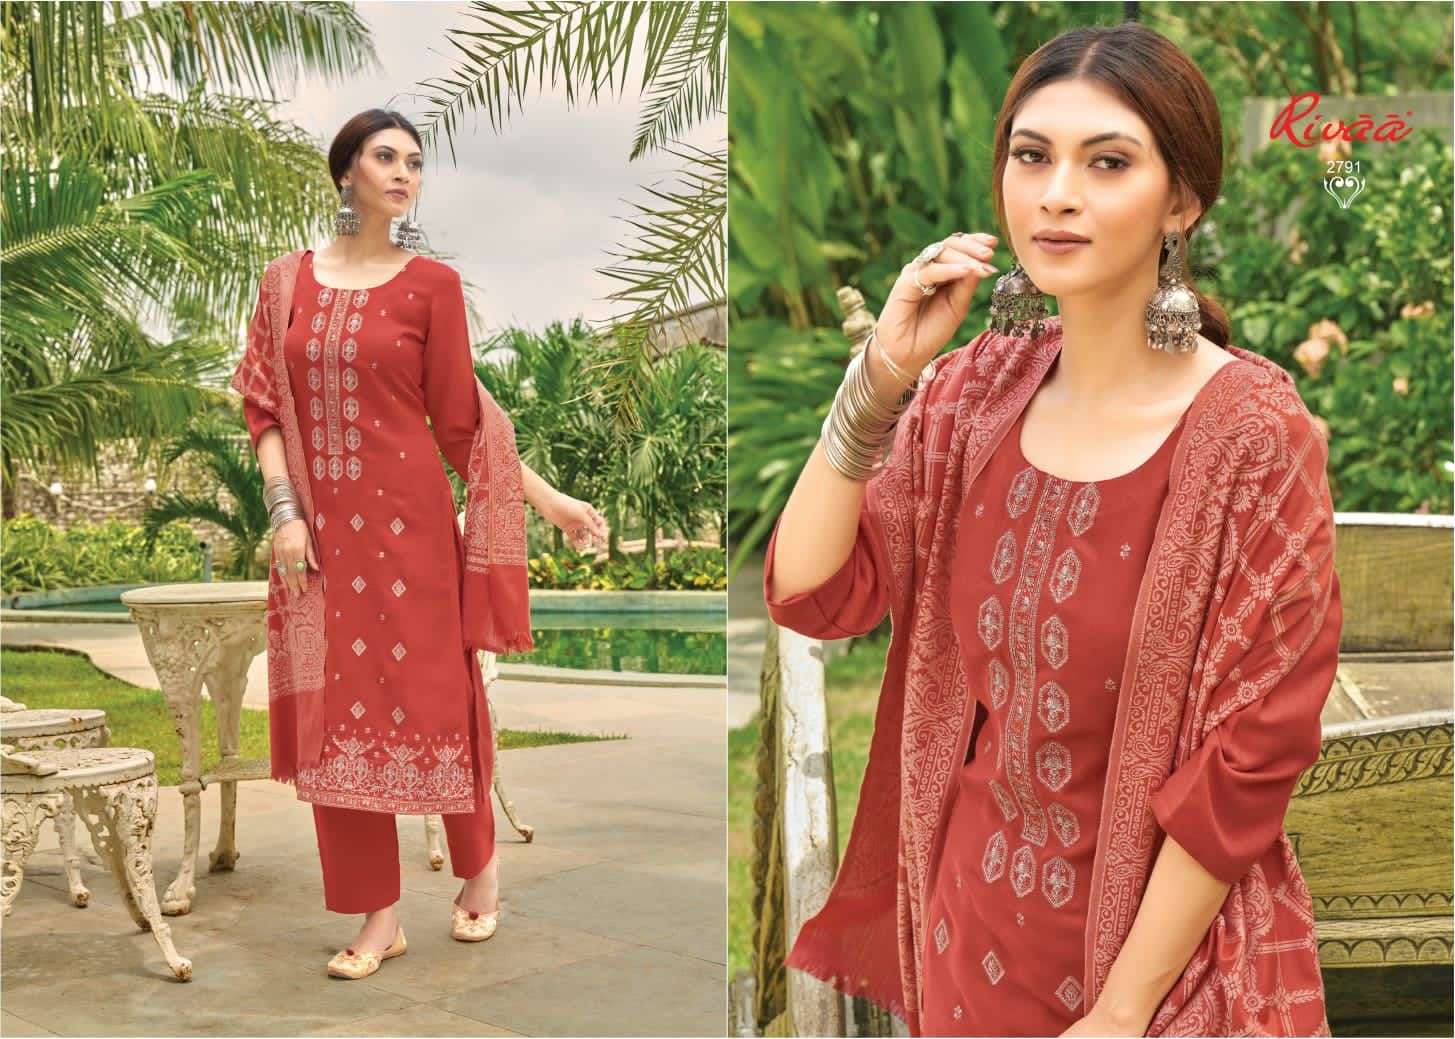 YASHIKA BY RIVAA 2786 TO 2792 SERIES BEAUTIFUL SUMMER COLLECTION PAKISATNI SUITS STYLISH FANCY COLORFUL CASUAL WEAR & ETHNIC WEAR HEAVY PASHMINA EMBROIDERED DRESSES AT WHOLESALE PRICE